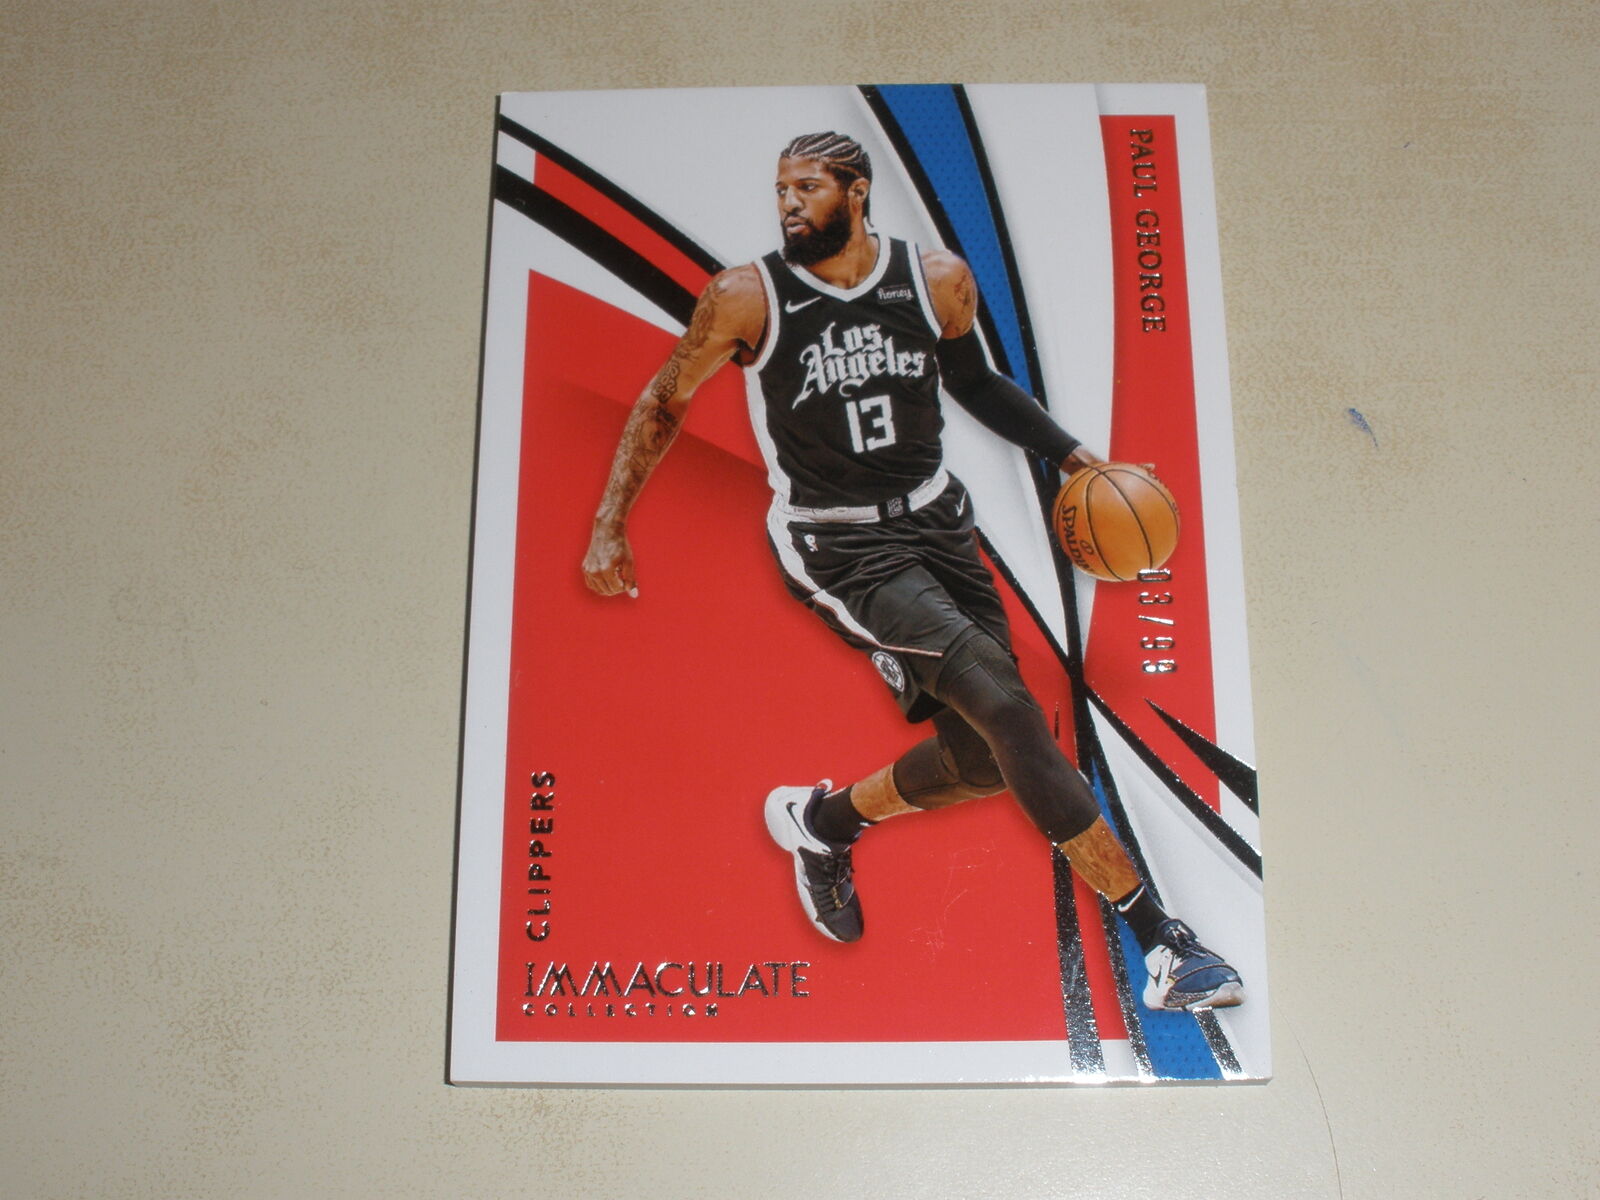 Immaculate Basketball Card Big Image Gallery of Top 100 Best 